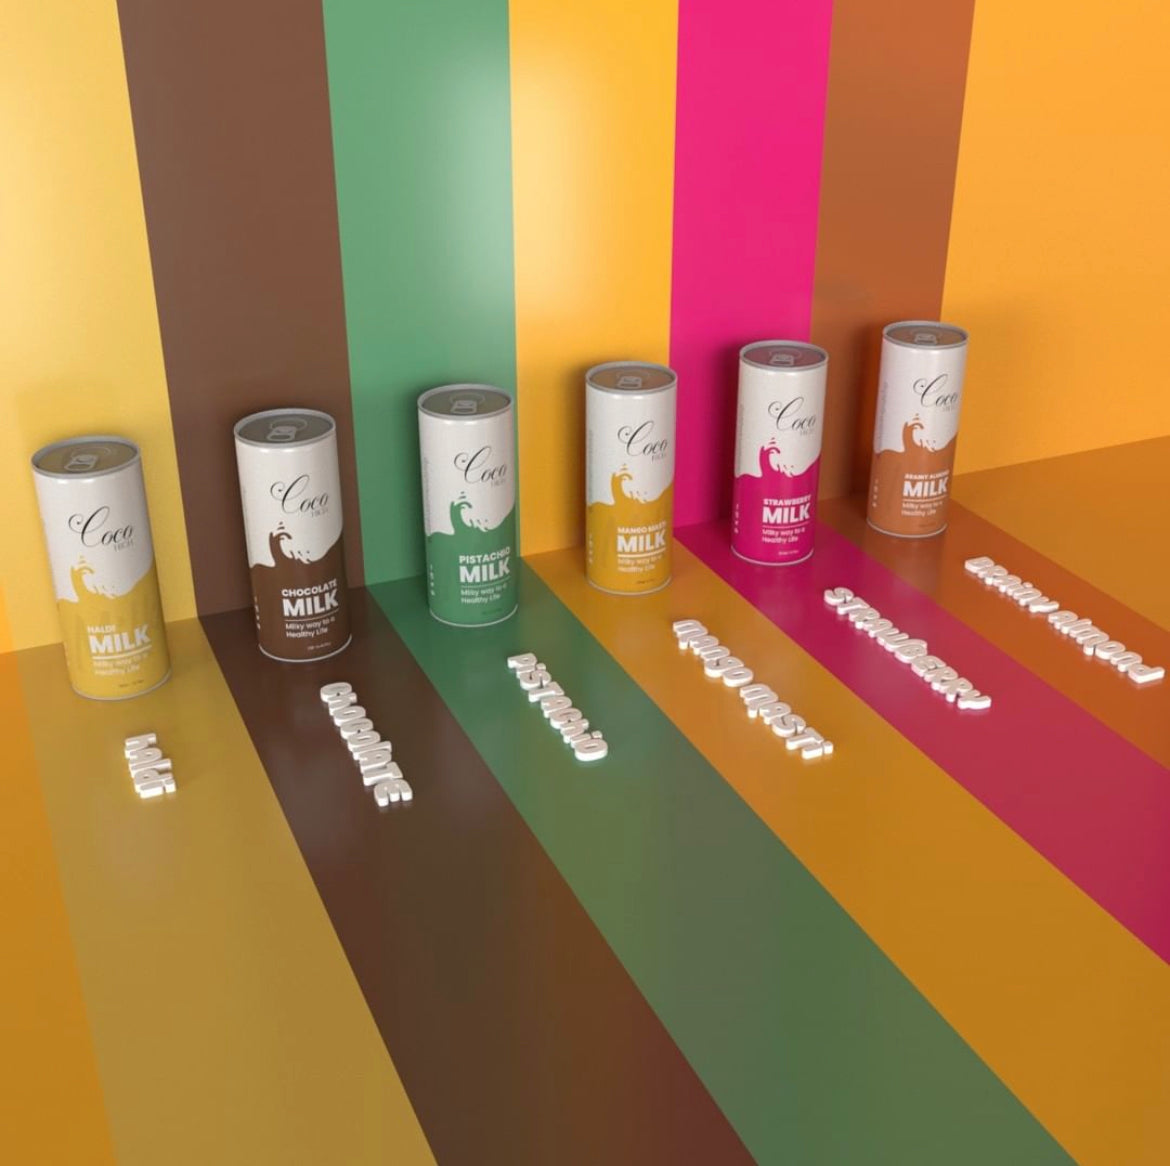 All the flavours of CocoHigh Flavoured Milk